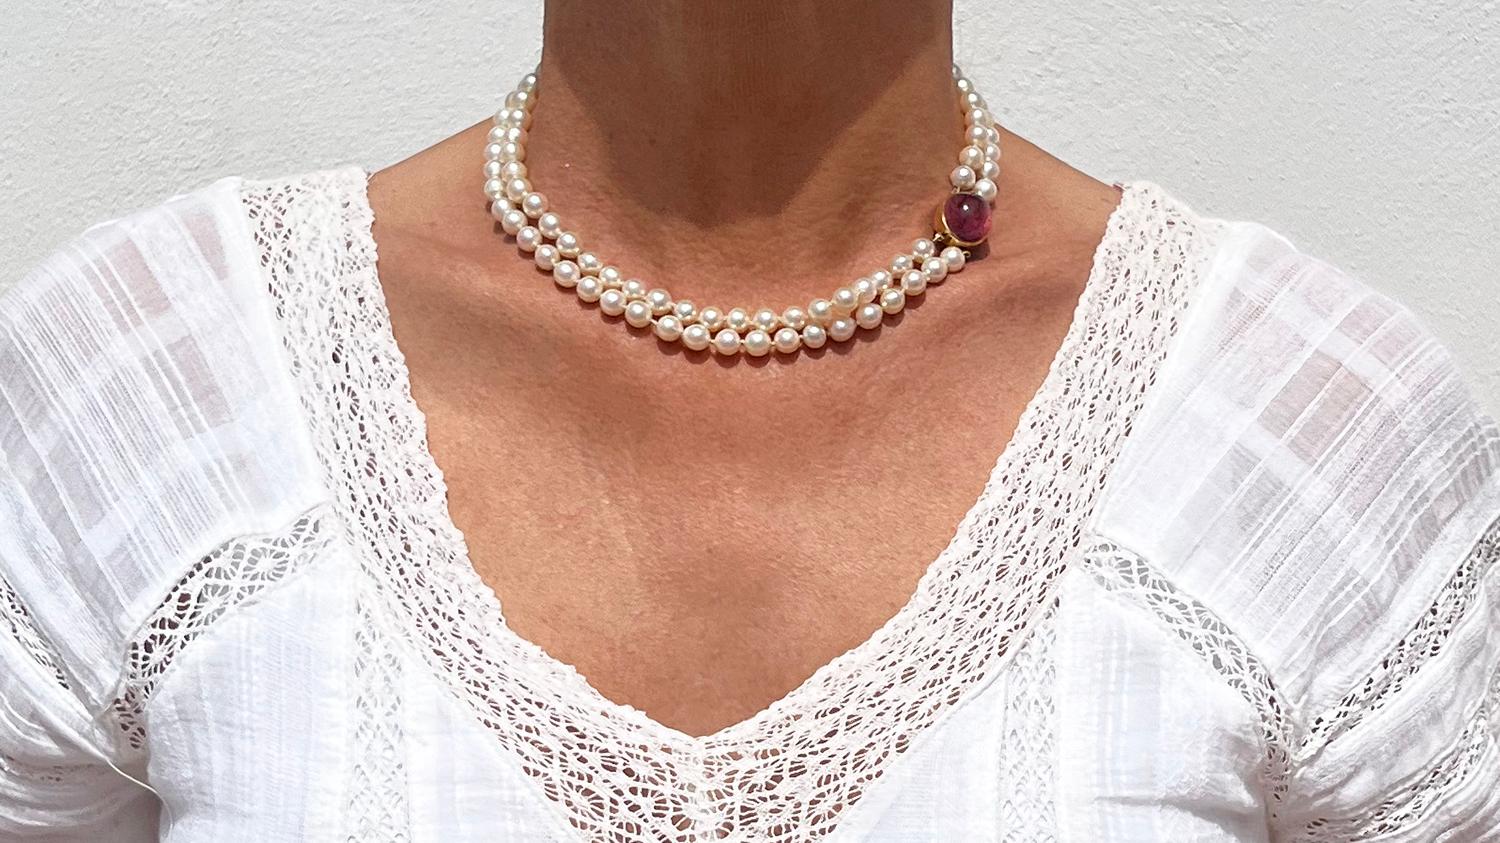 This double strand pearl necklace has cultured pearls with a beautiful creamy colour. The necklace closes with a 18 karat gold clasp box which is adorned with a pink tourmaline.

No matter if your style skews more minimalist or if you want something